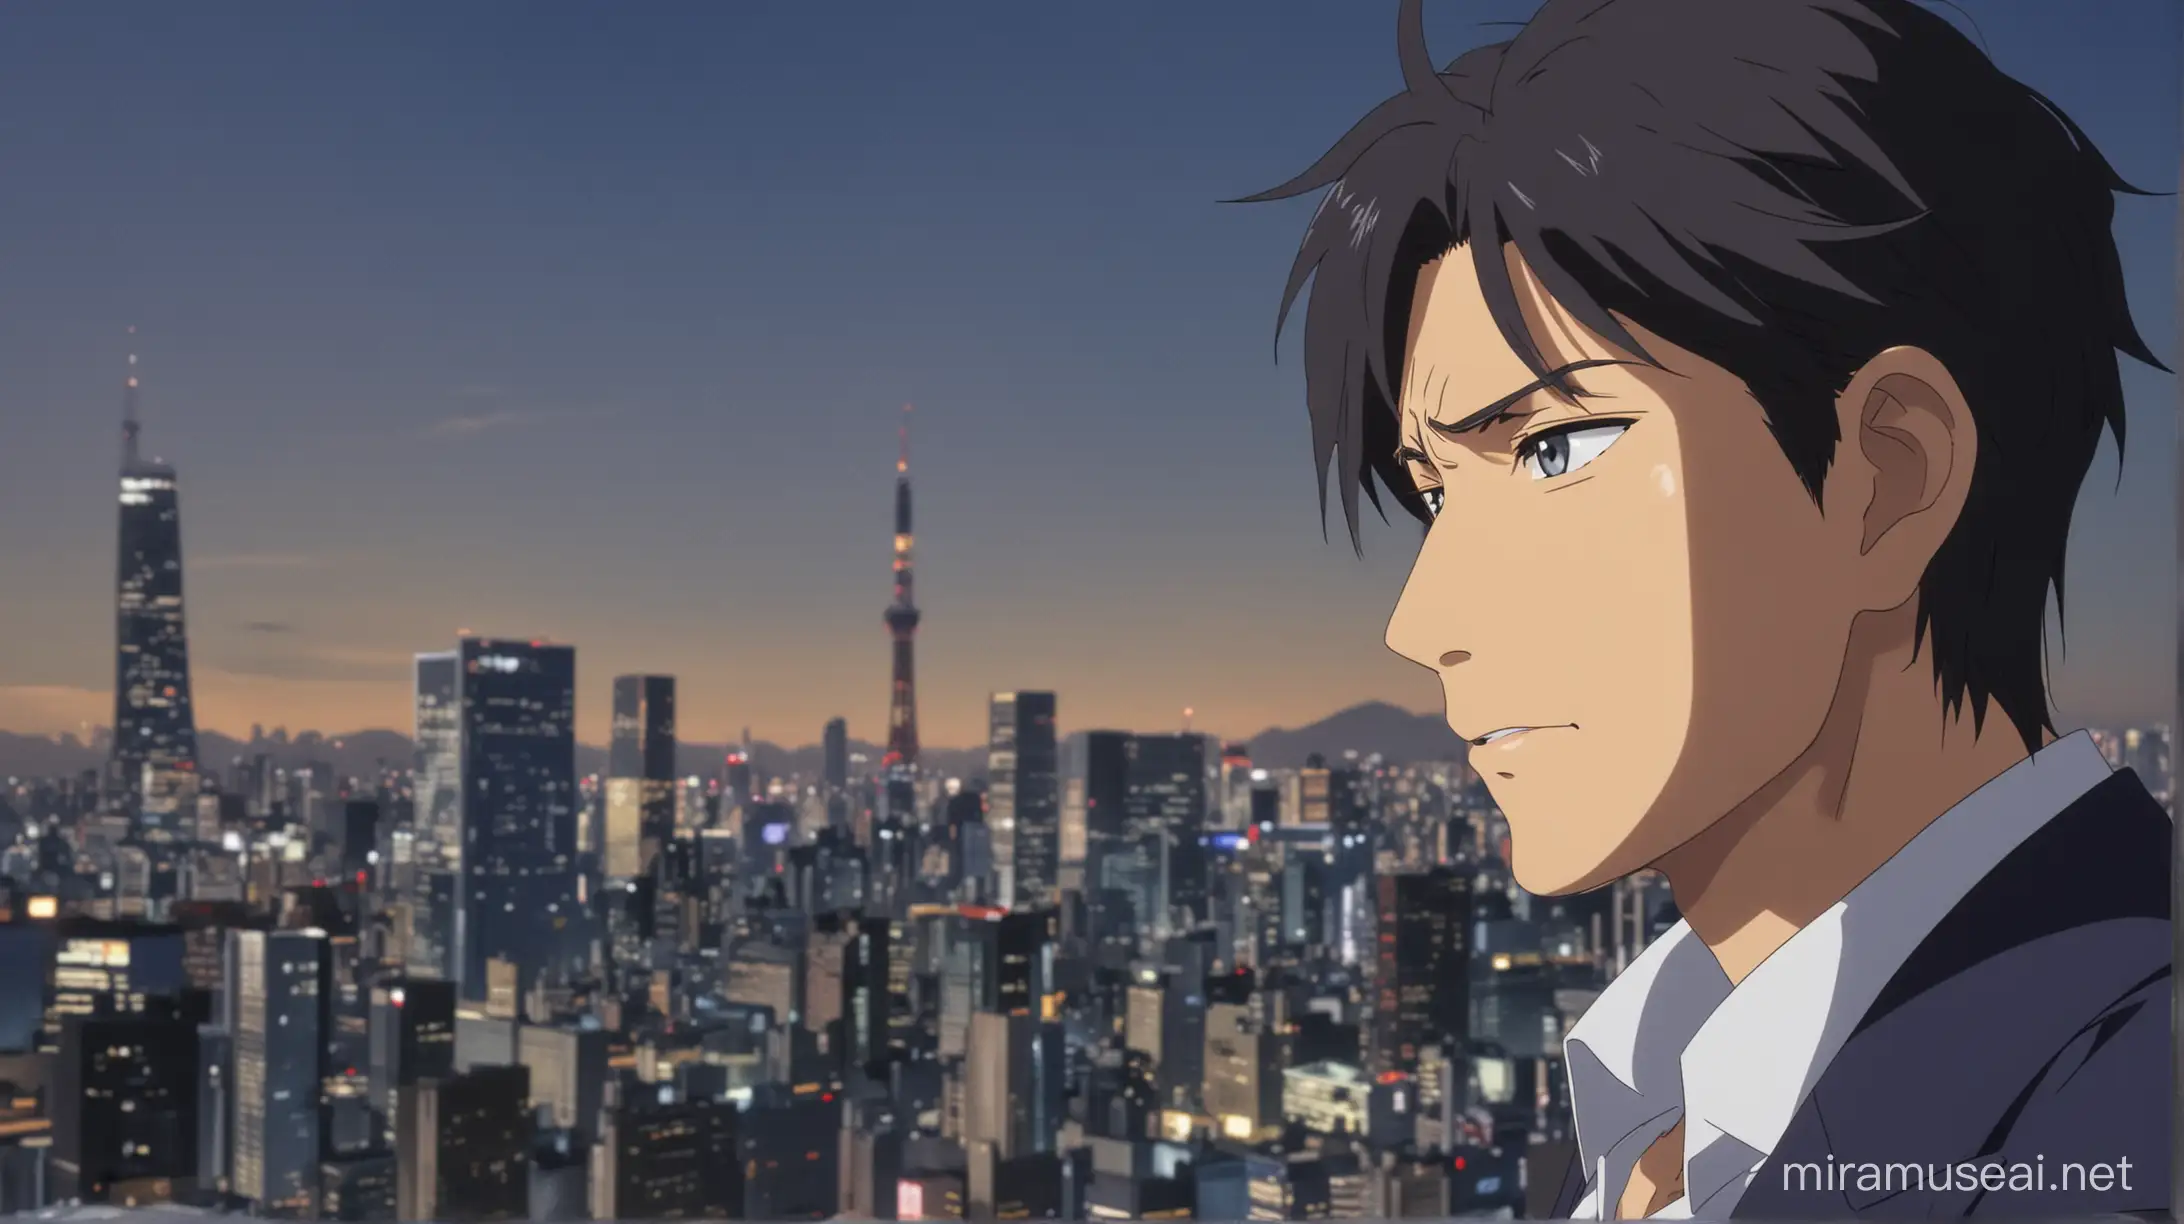 Anime, Tokyo older Business man Kaito, standing on a rooftop, gazing out at the Tokyo Skyline.
Show close-up shots of Kaito's troubled expression as he contemplates the uncertain future.